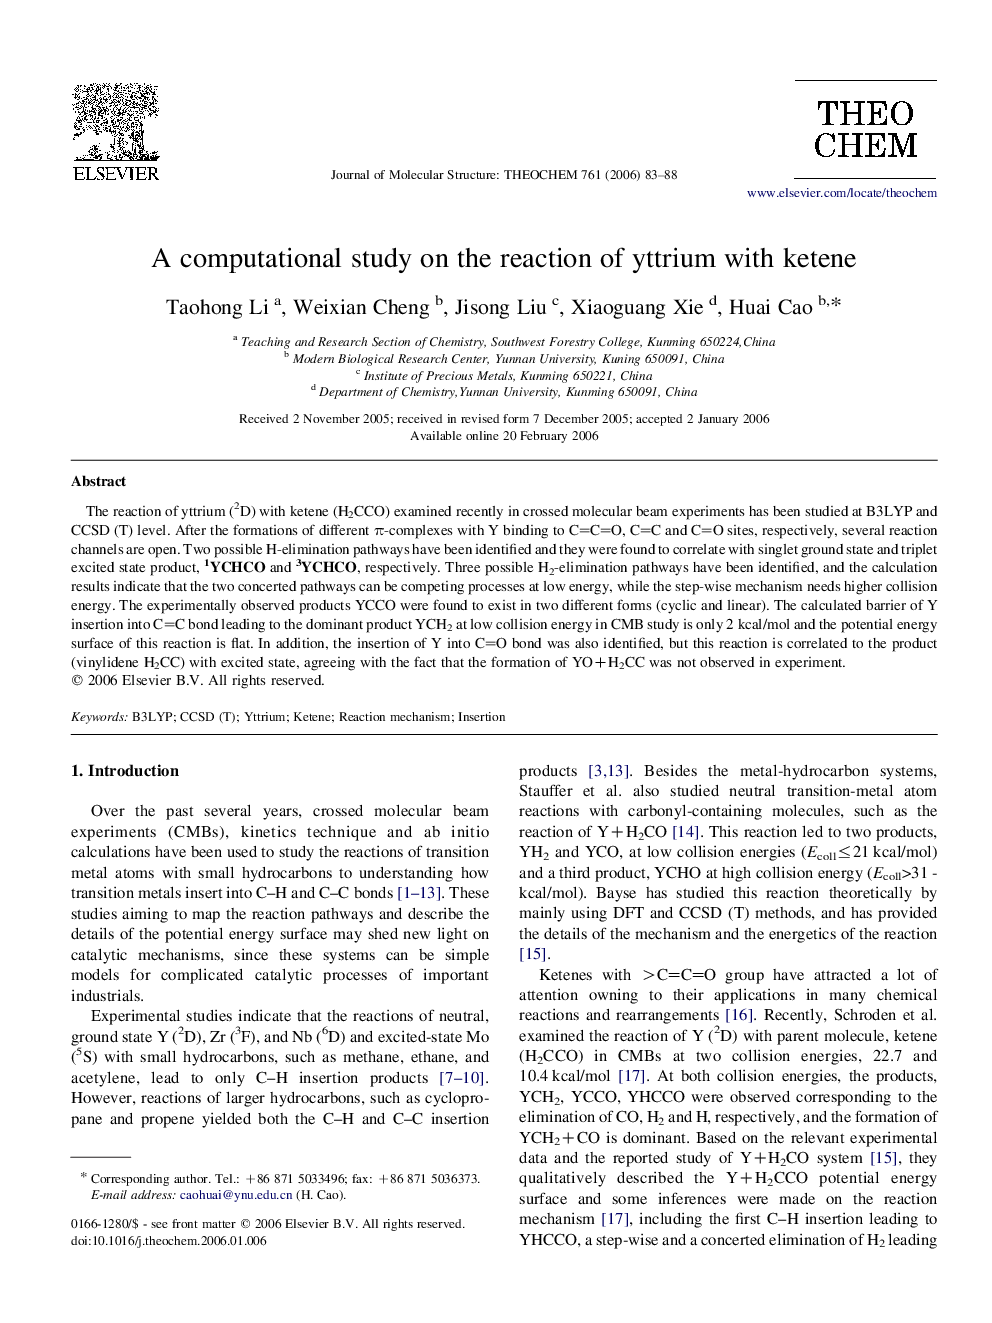 A computational study on the reaction of yttrium with ketene